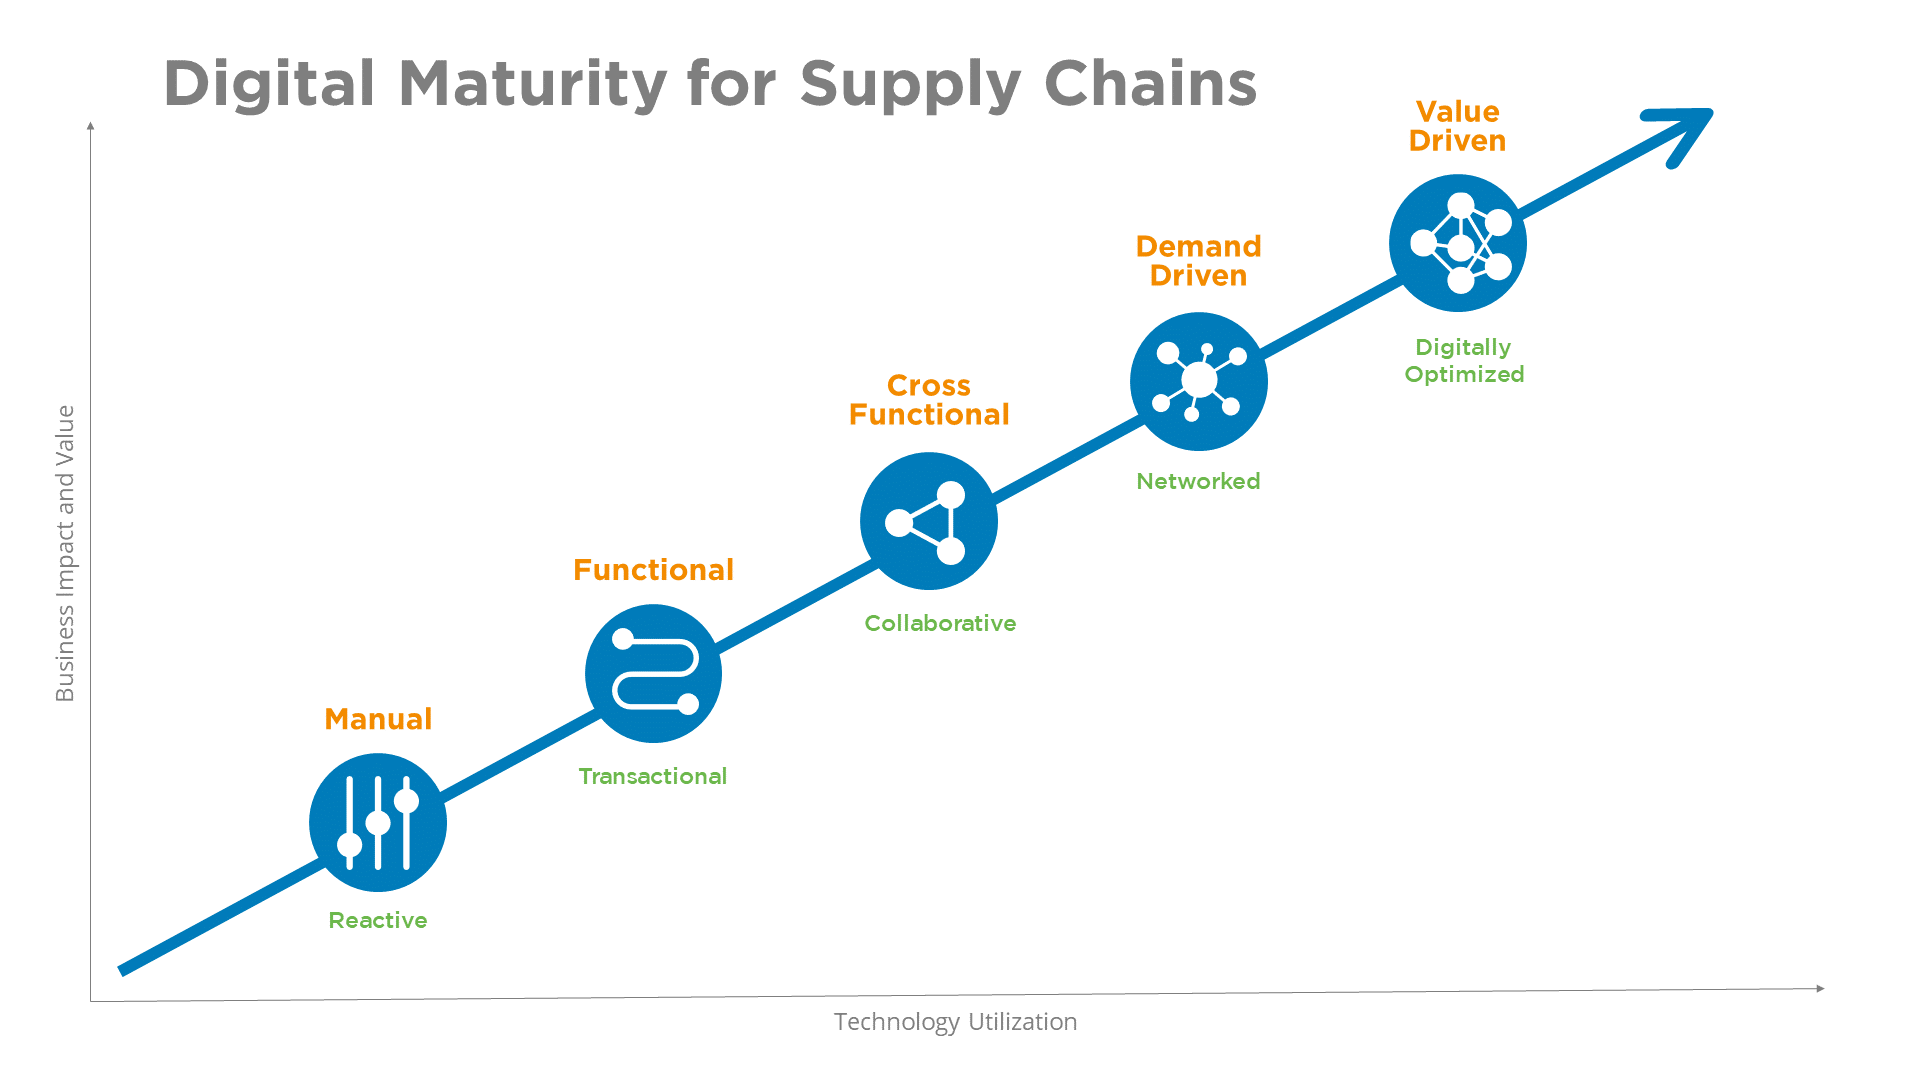 Digital Maturity for Supply Chains